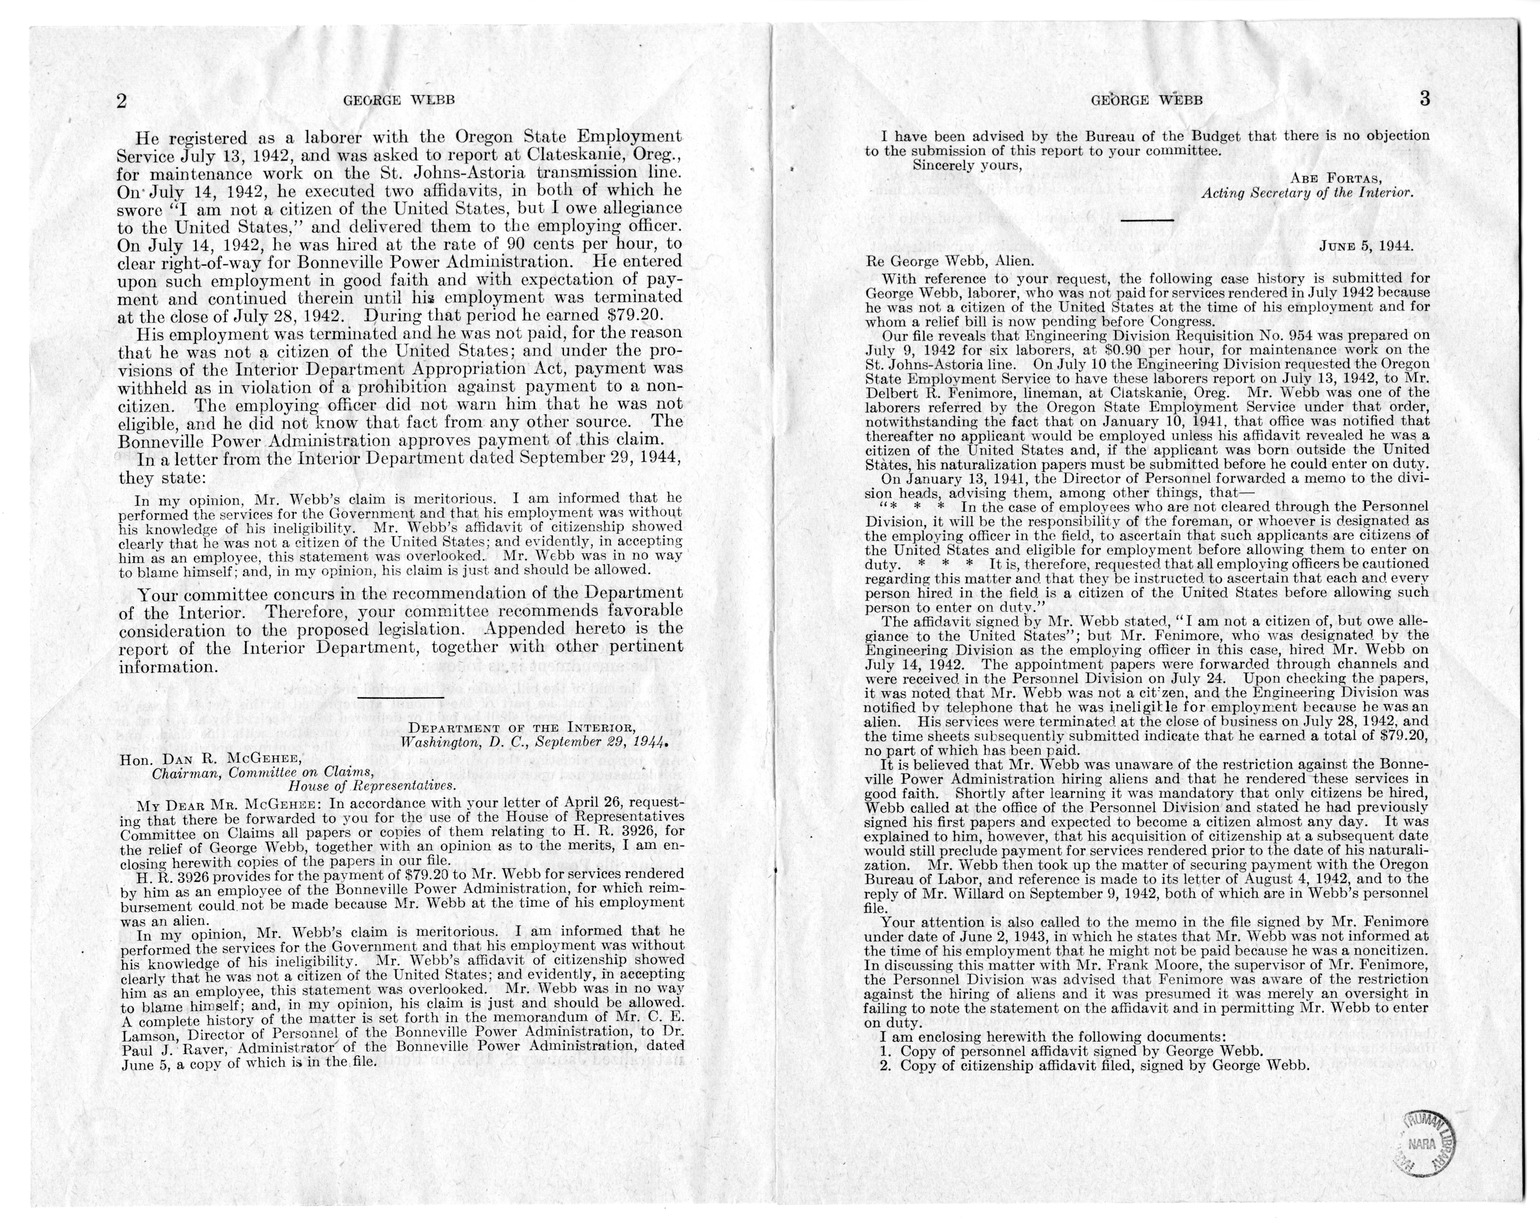 Memorandum from Frederick J. Bailey to M. C. Latta, H.R. 1344, For the Relief of George Webb, with Attachments